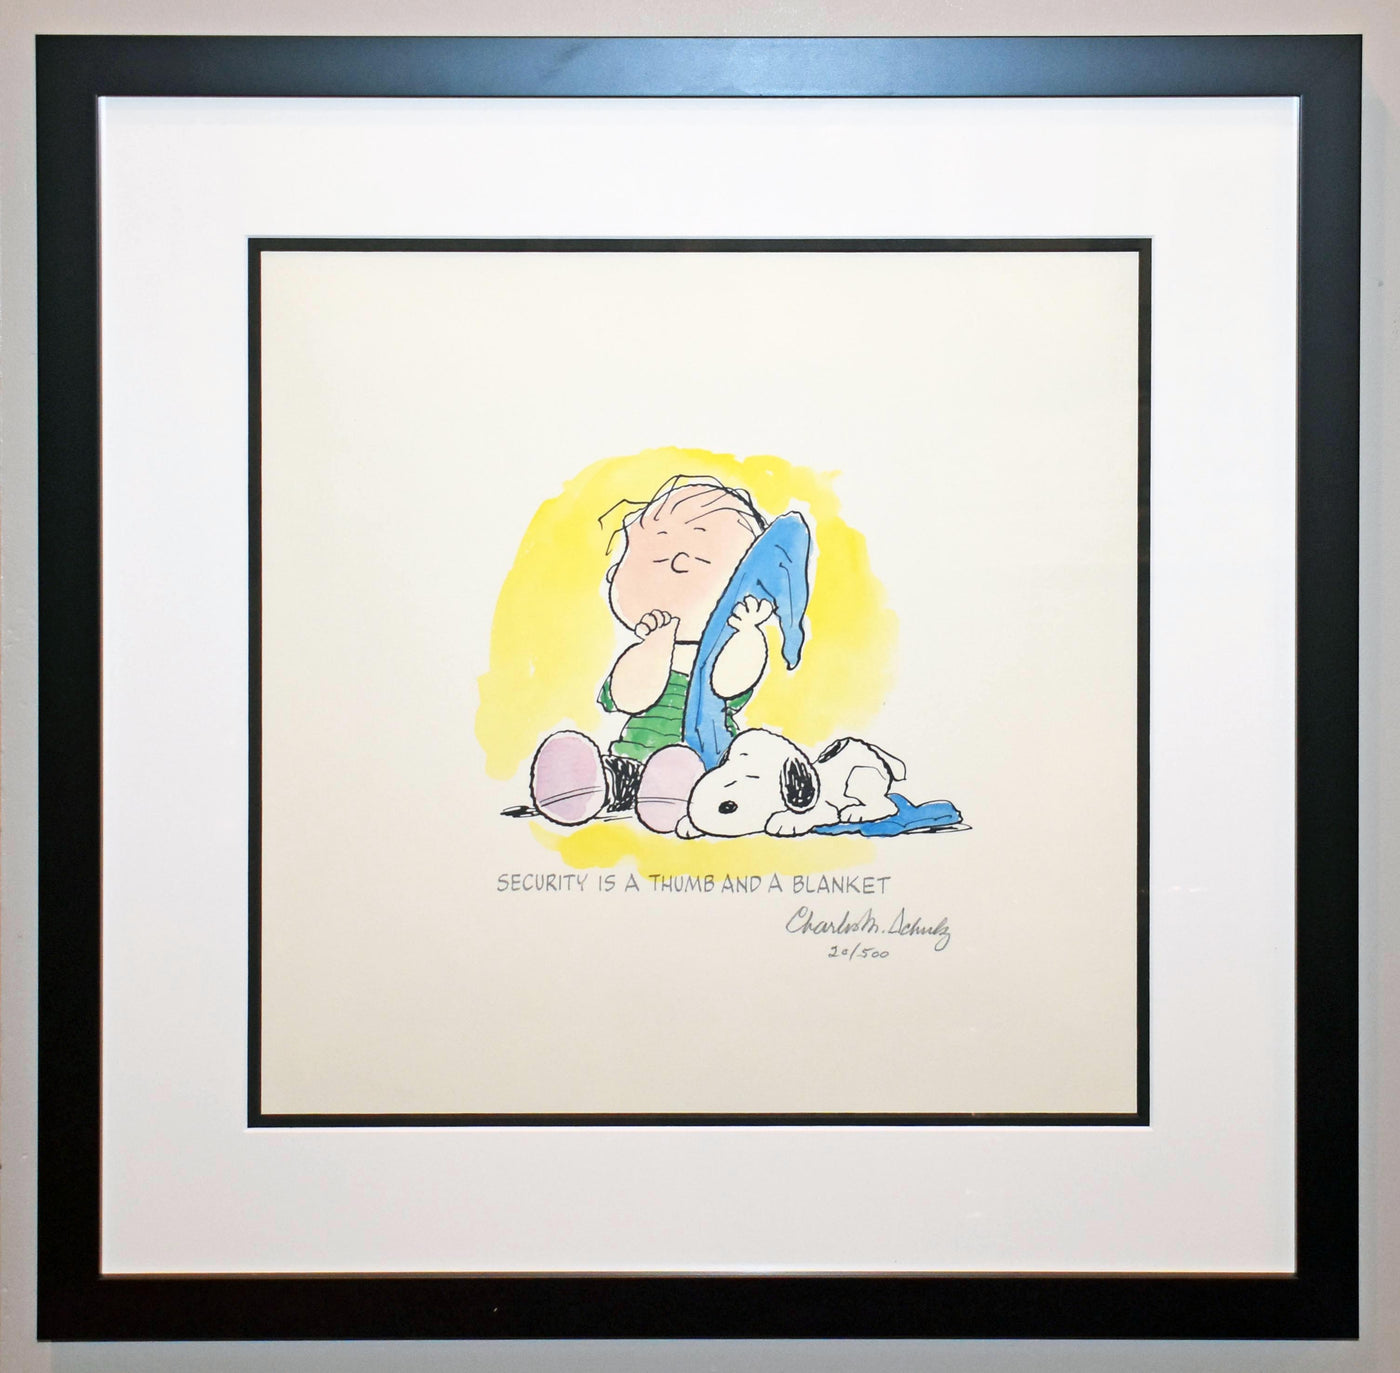 Charles Schulz Signed Lithograph, Security is a Thumb and Blanket